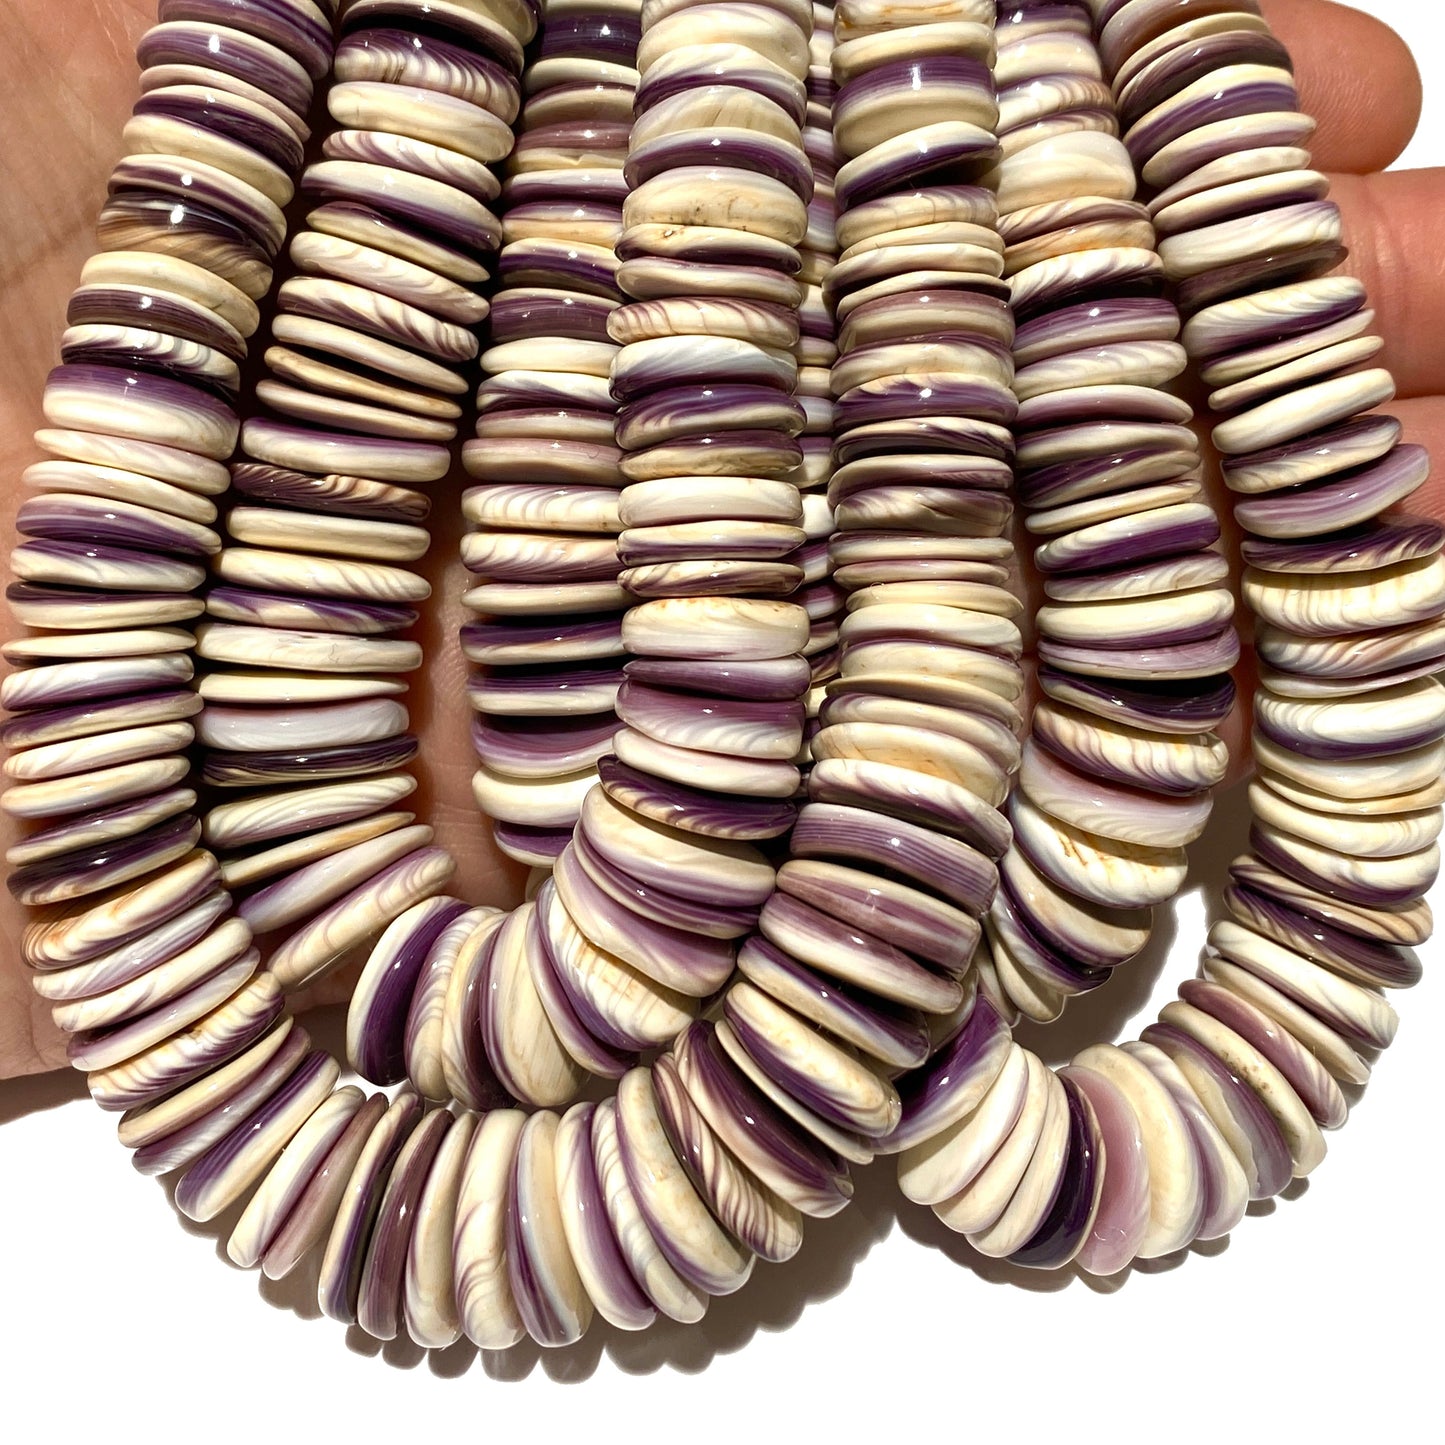 Gigantic Wampum Quahog Shell Beads From New England, USA (America's First Currency From Year 1637-1673) Natural Deep-Ocean Seashell, Rondelle, Heishi, Graduated, 15.5 Inches, 8-16mm